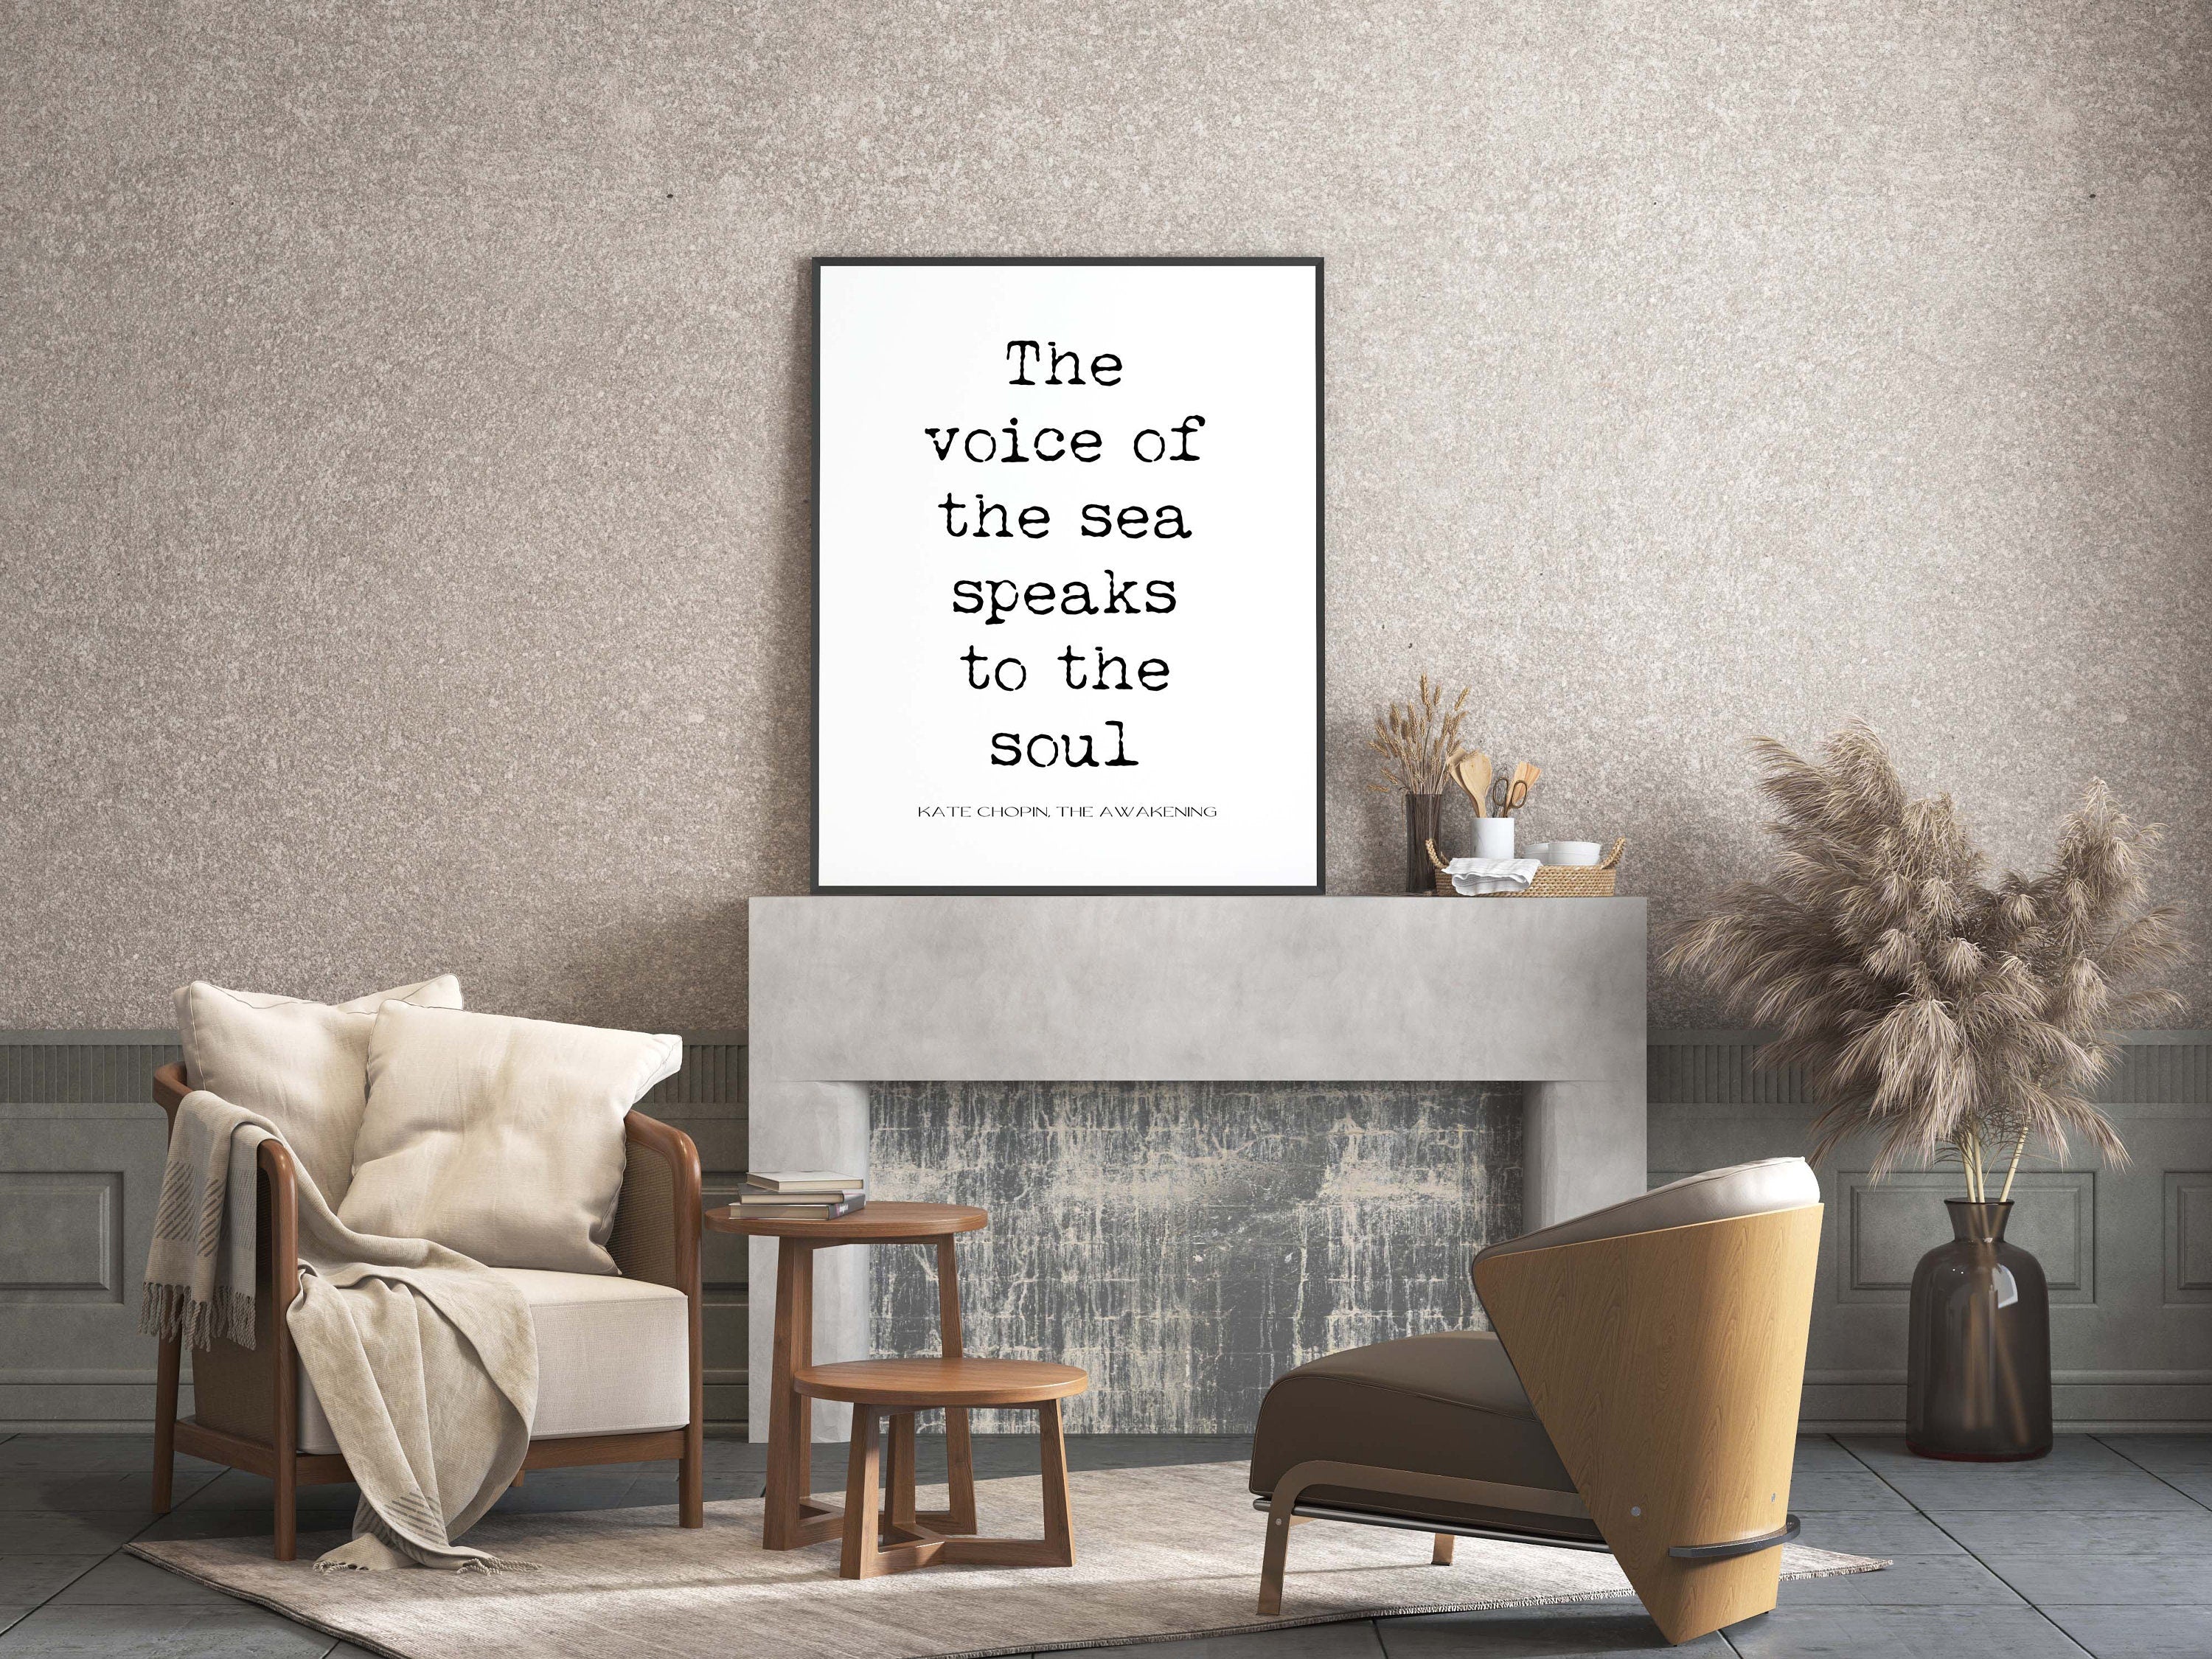 The Voice of the Sea The Awakening Quote Inspirational Print Gift, Kate Chopin Unframed Typography Print in Black & White